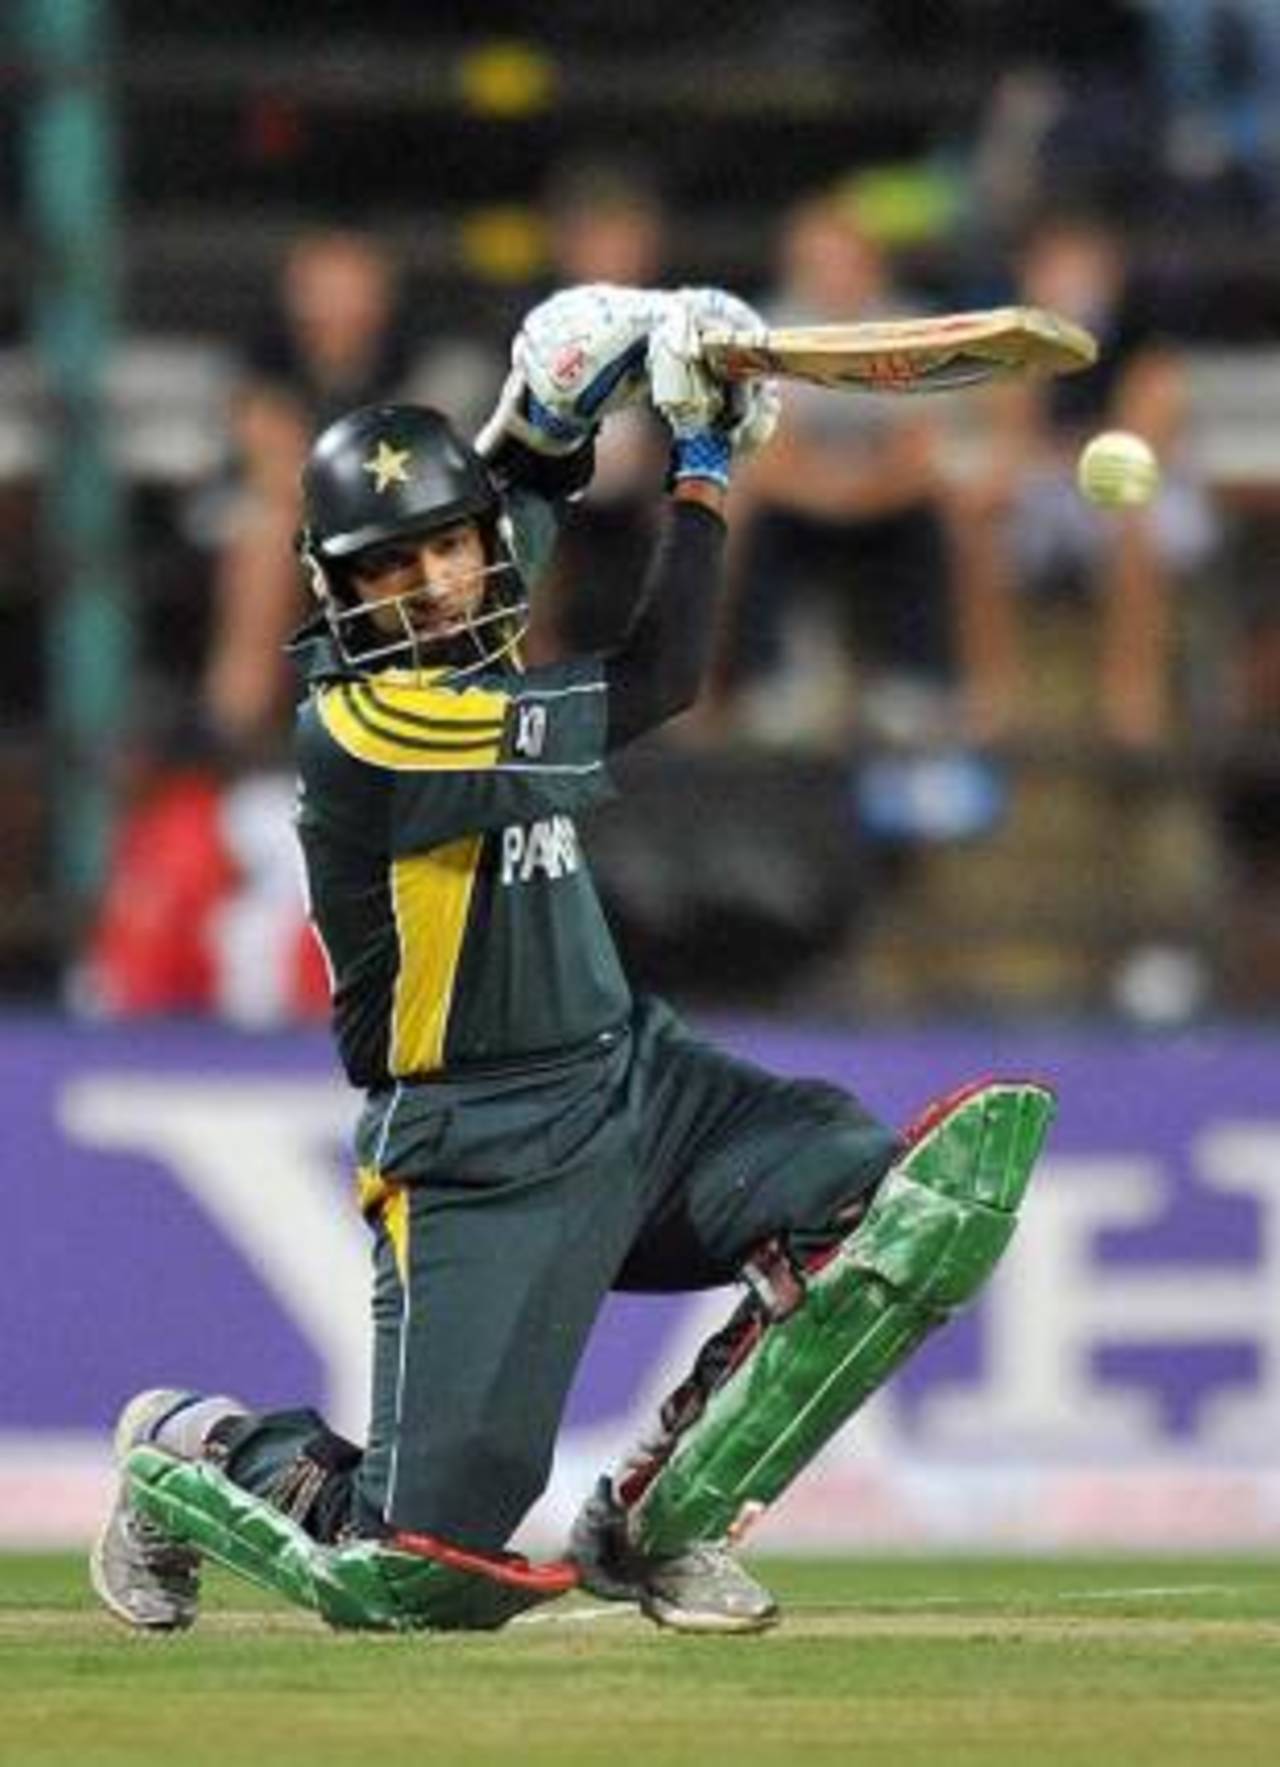 Mohammad Yousuf drives during his innings of 23, Pakistan v West Indies, Champions Trophy, Group A, Johannesburg, September 23, 2009